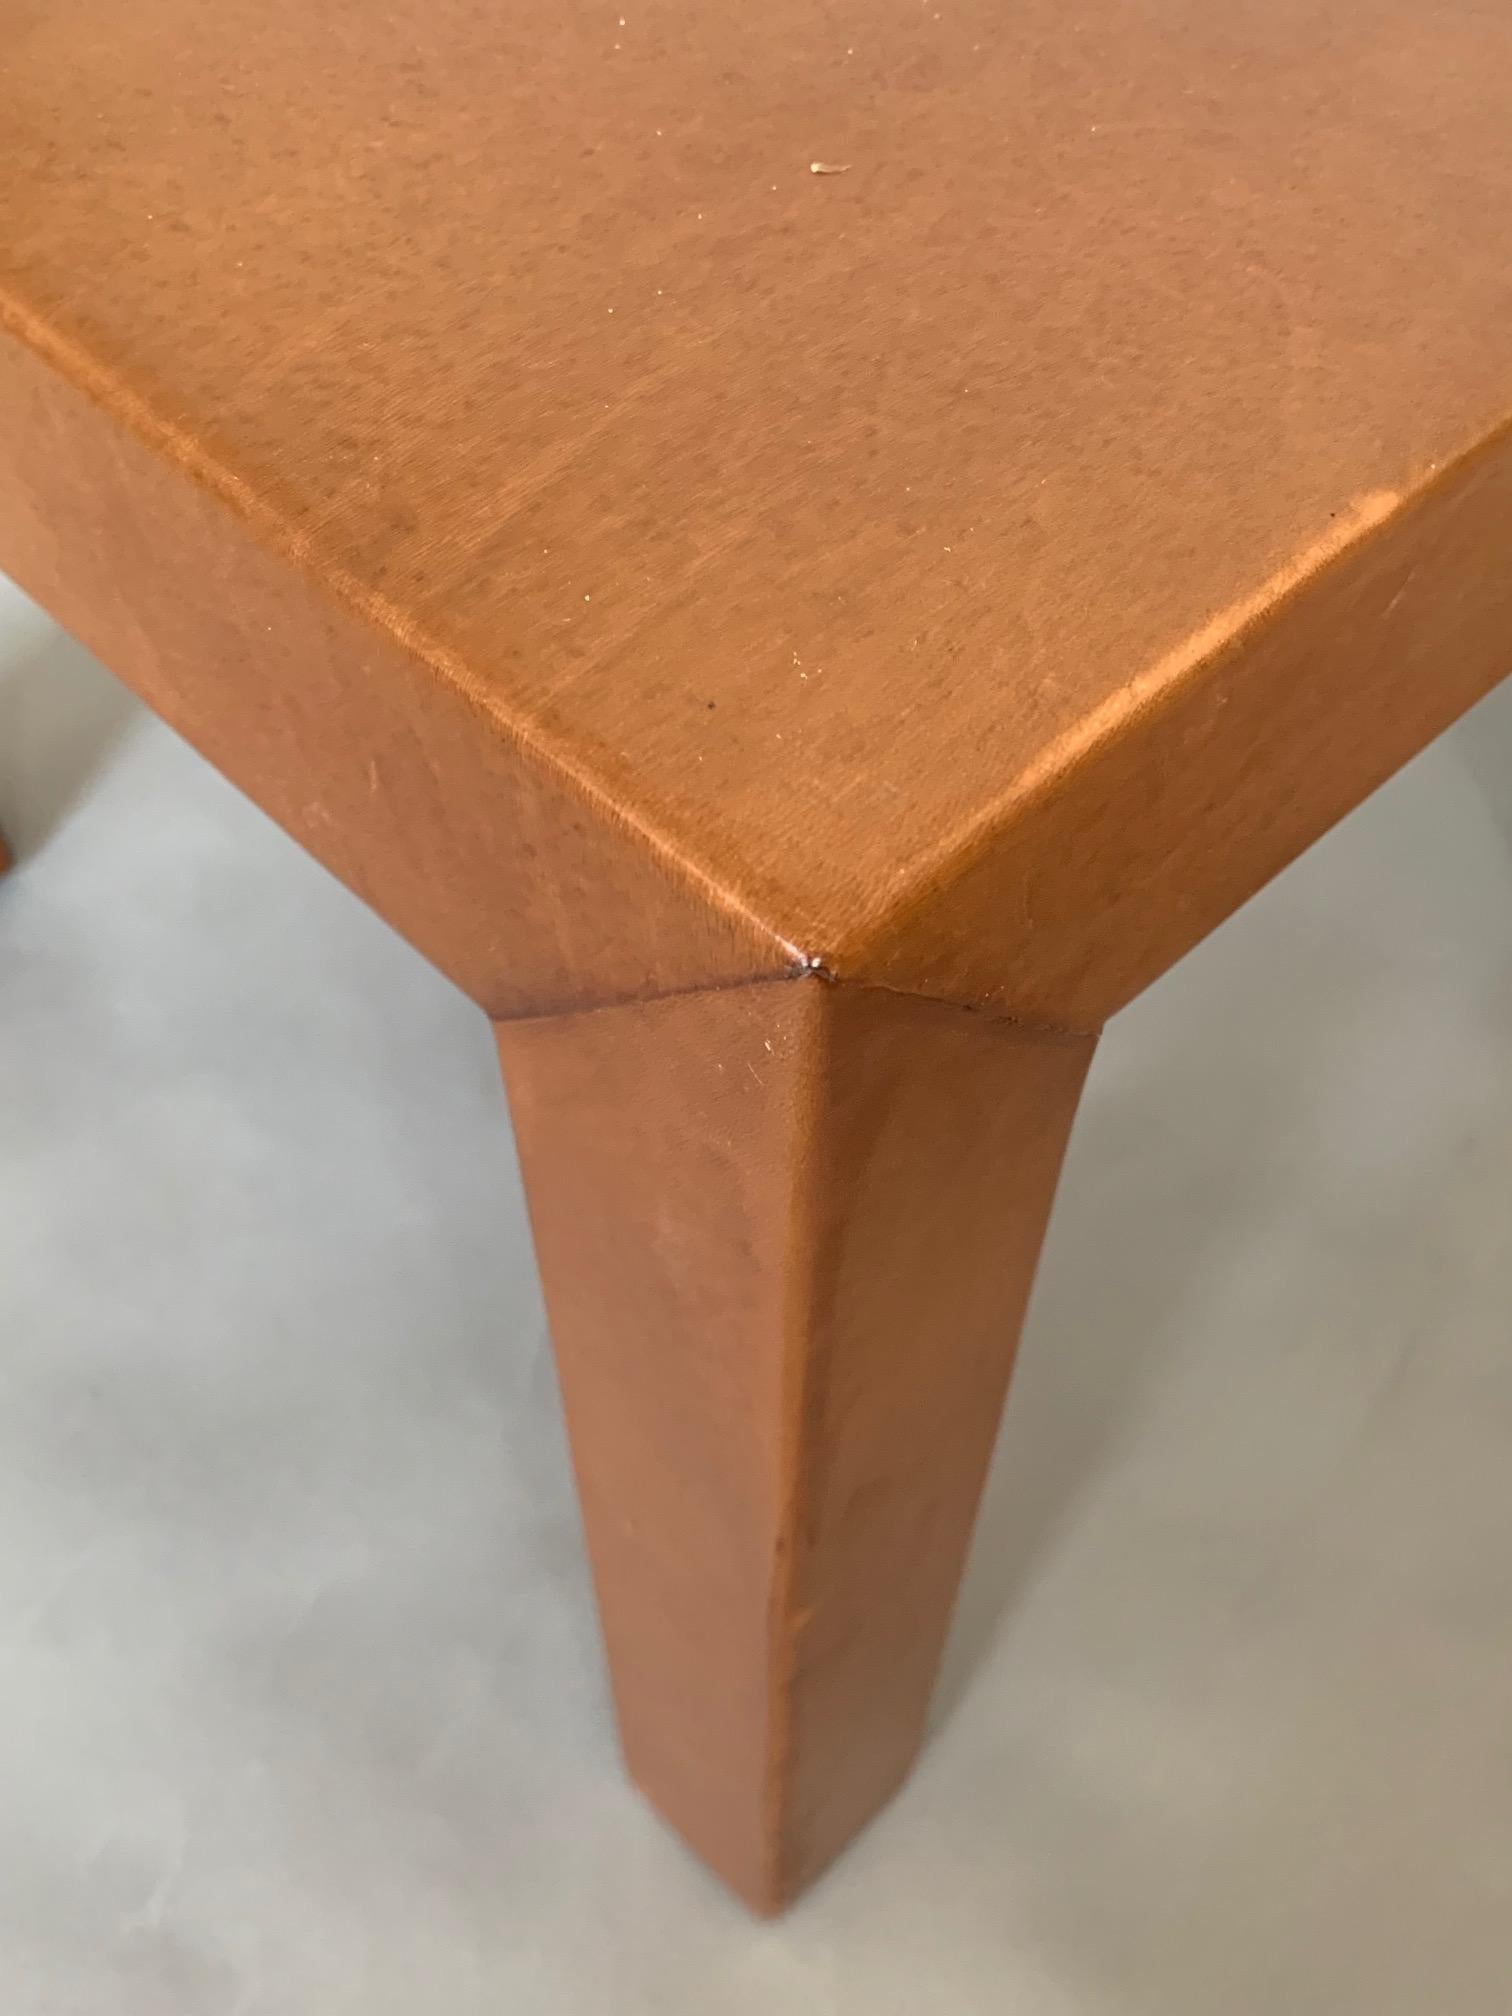 A pair of custom occasional tables done in cognac leather by MHG Studio.